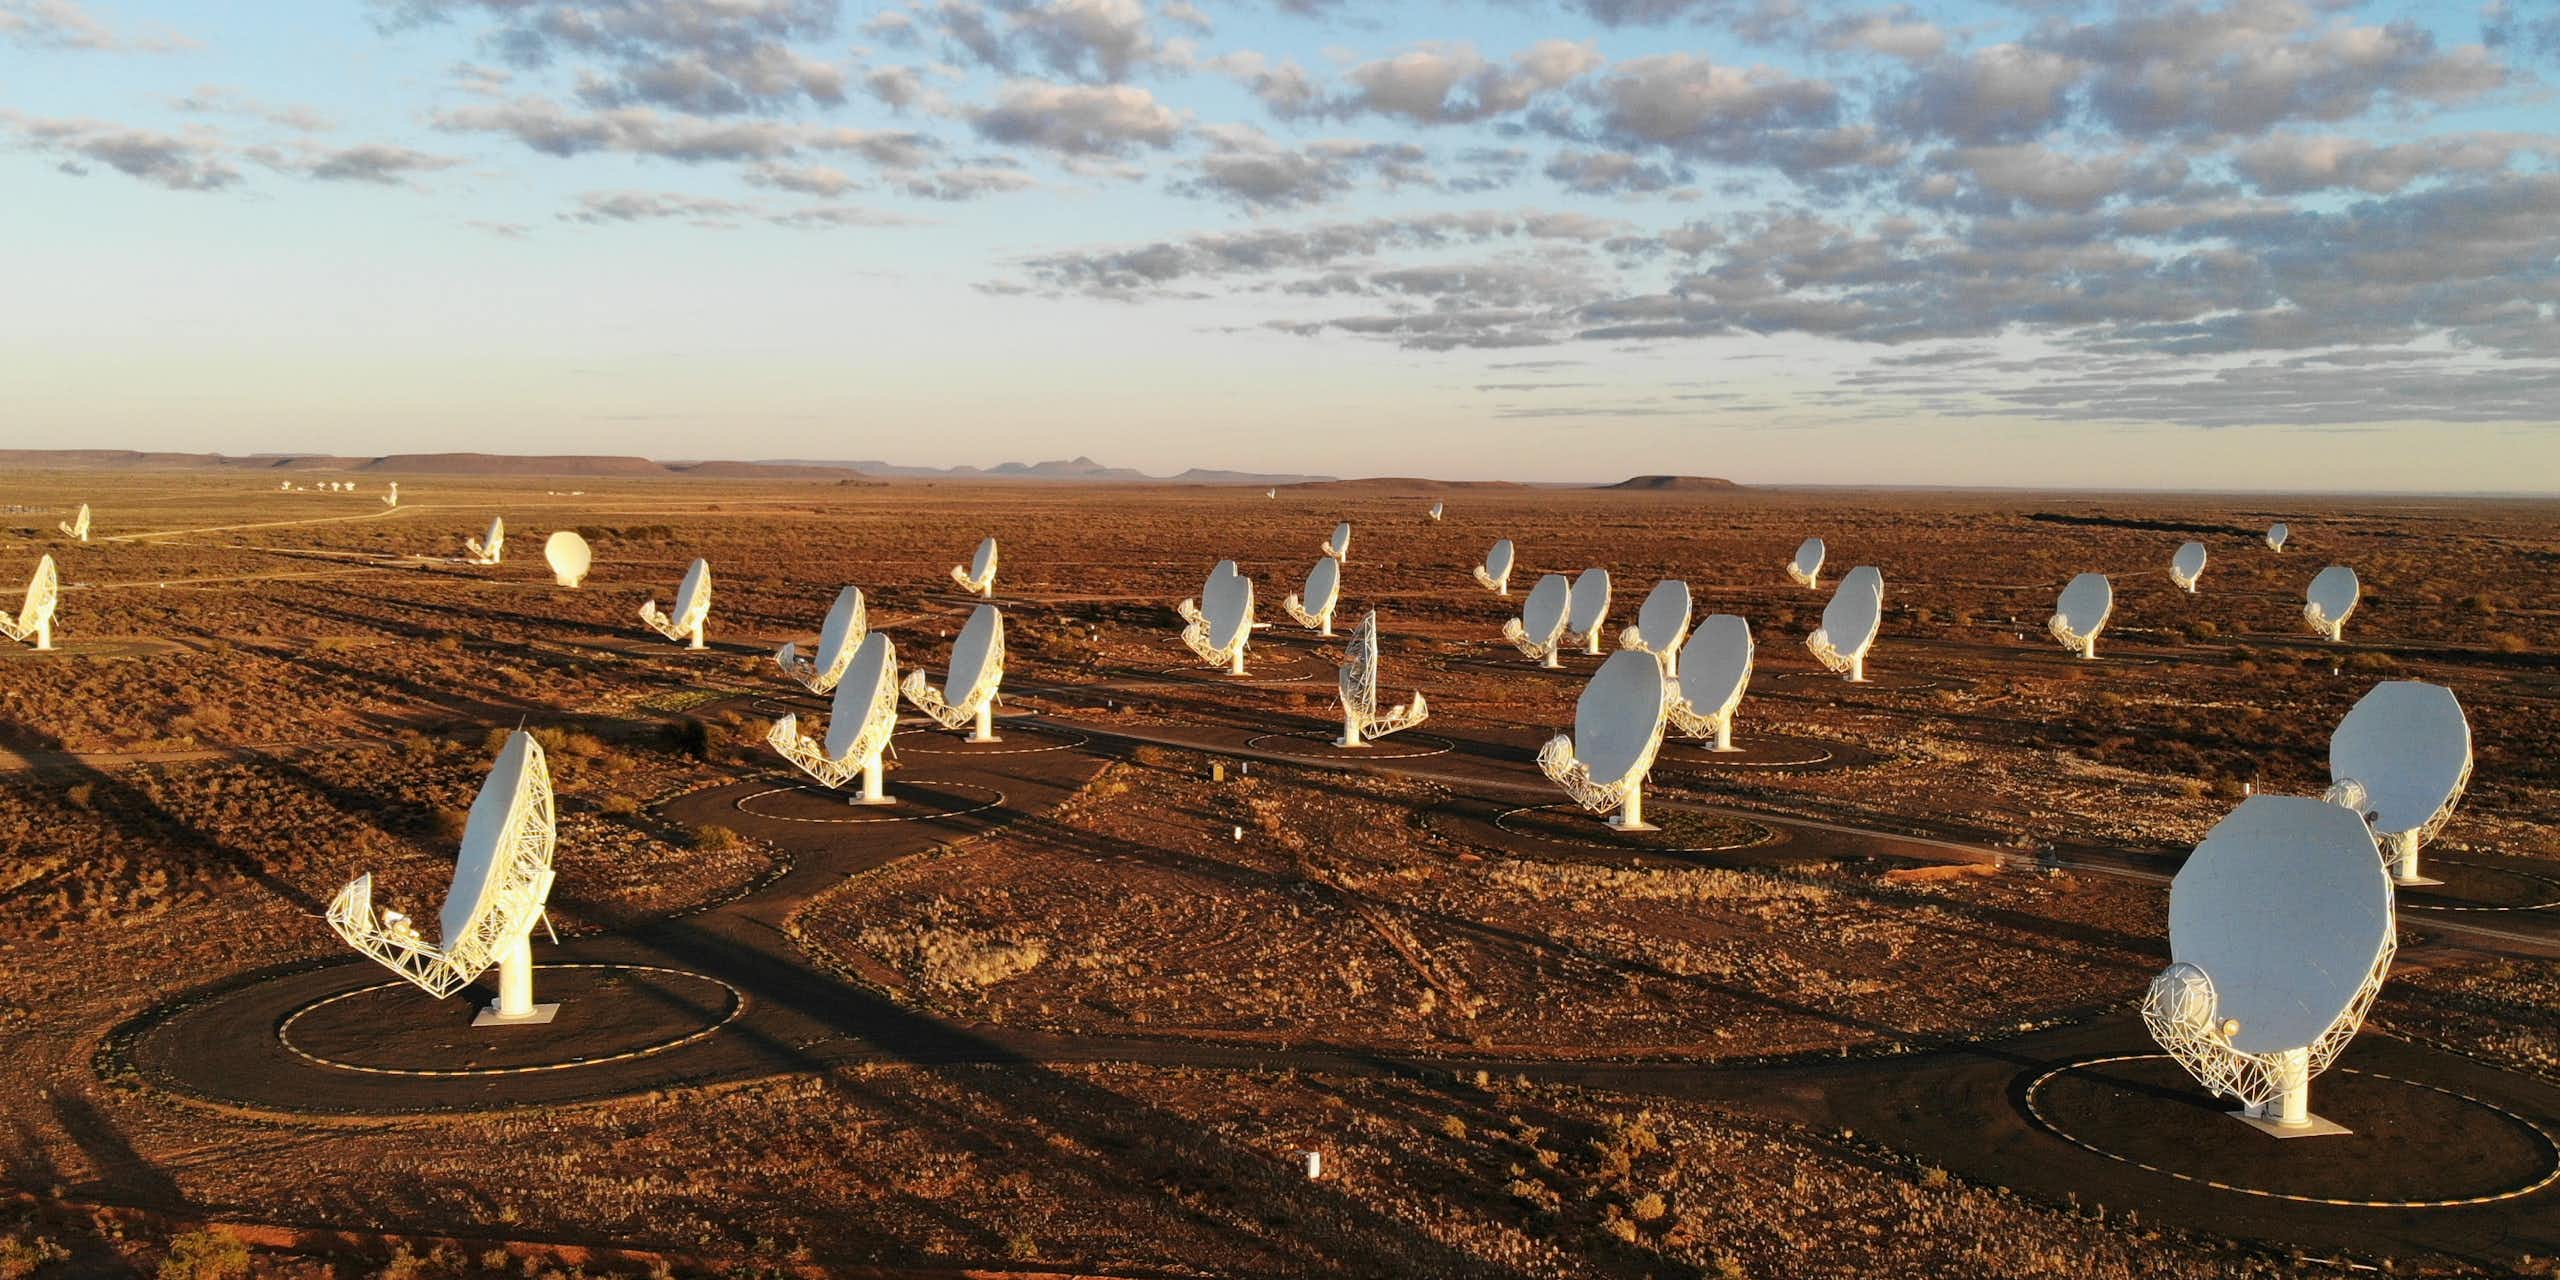 Large white satellite dishes, their receivers pointed up to the sky, are photographed in a sprawling, empty patch of land